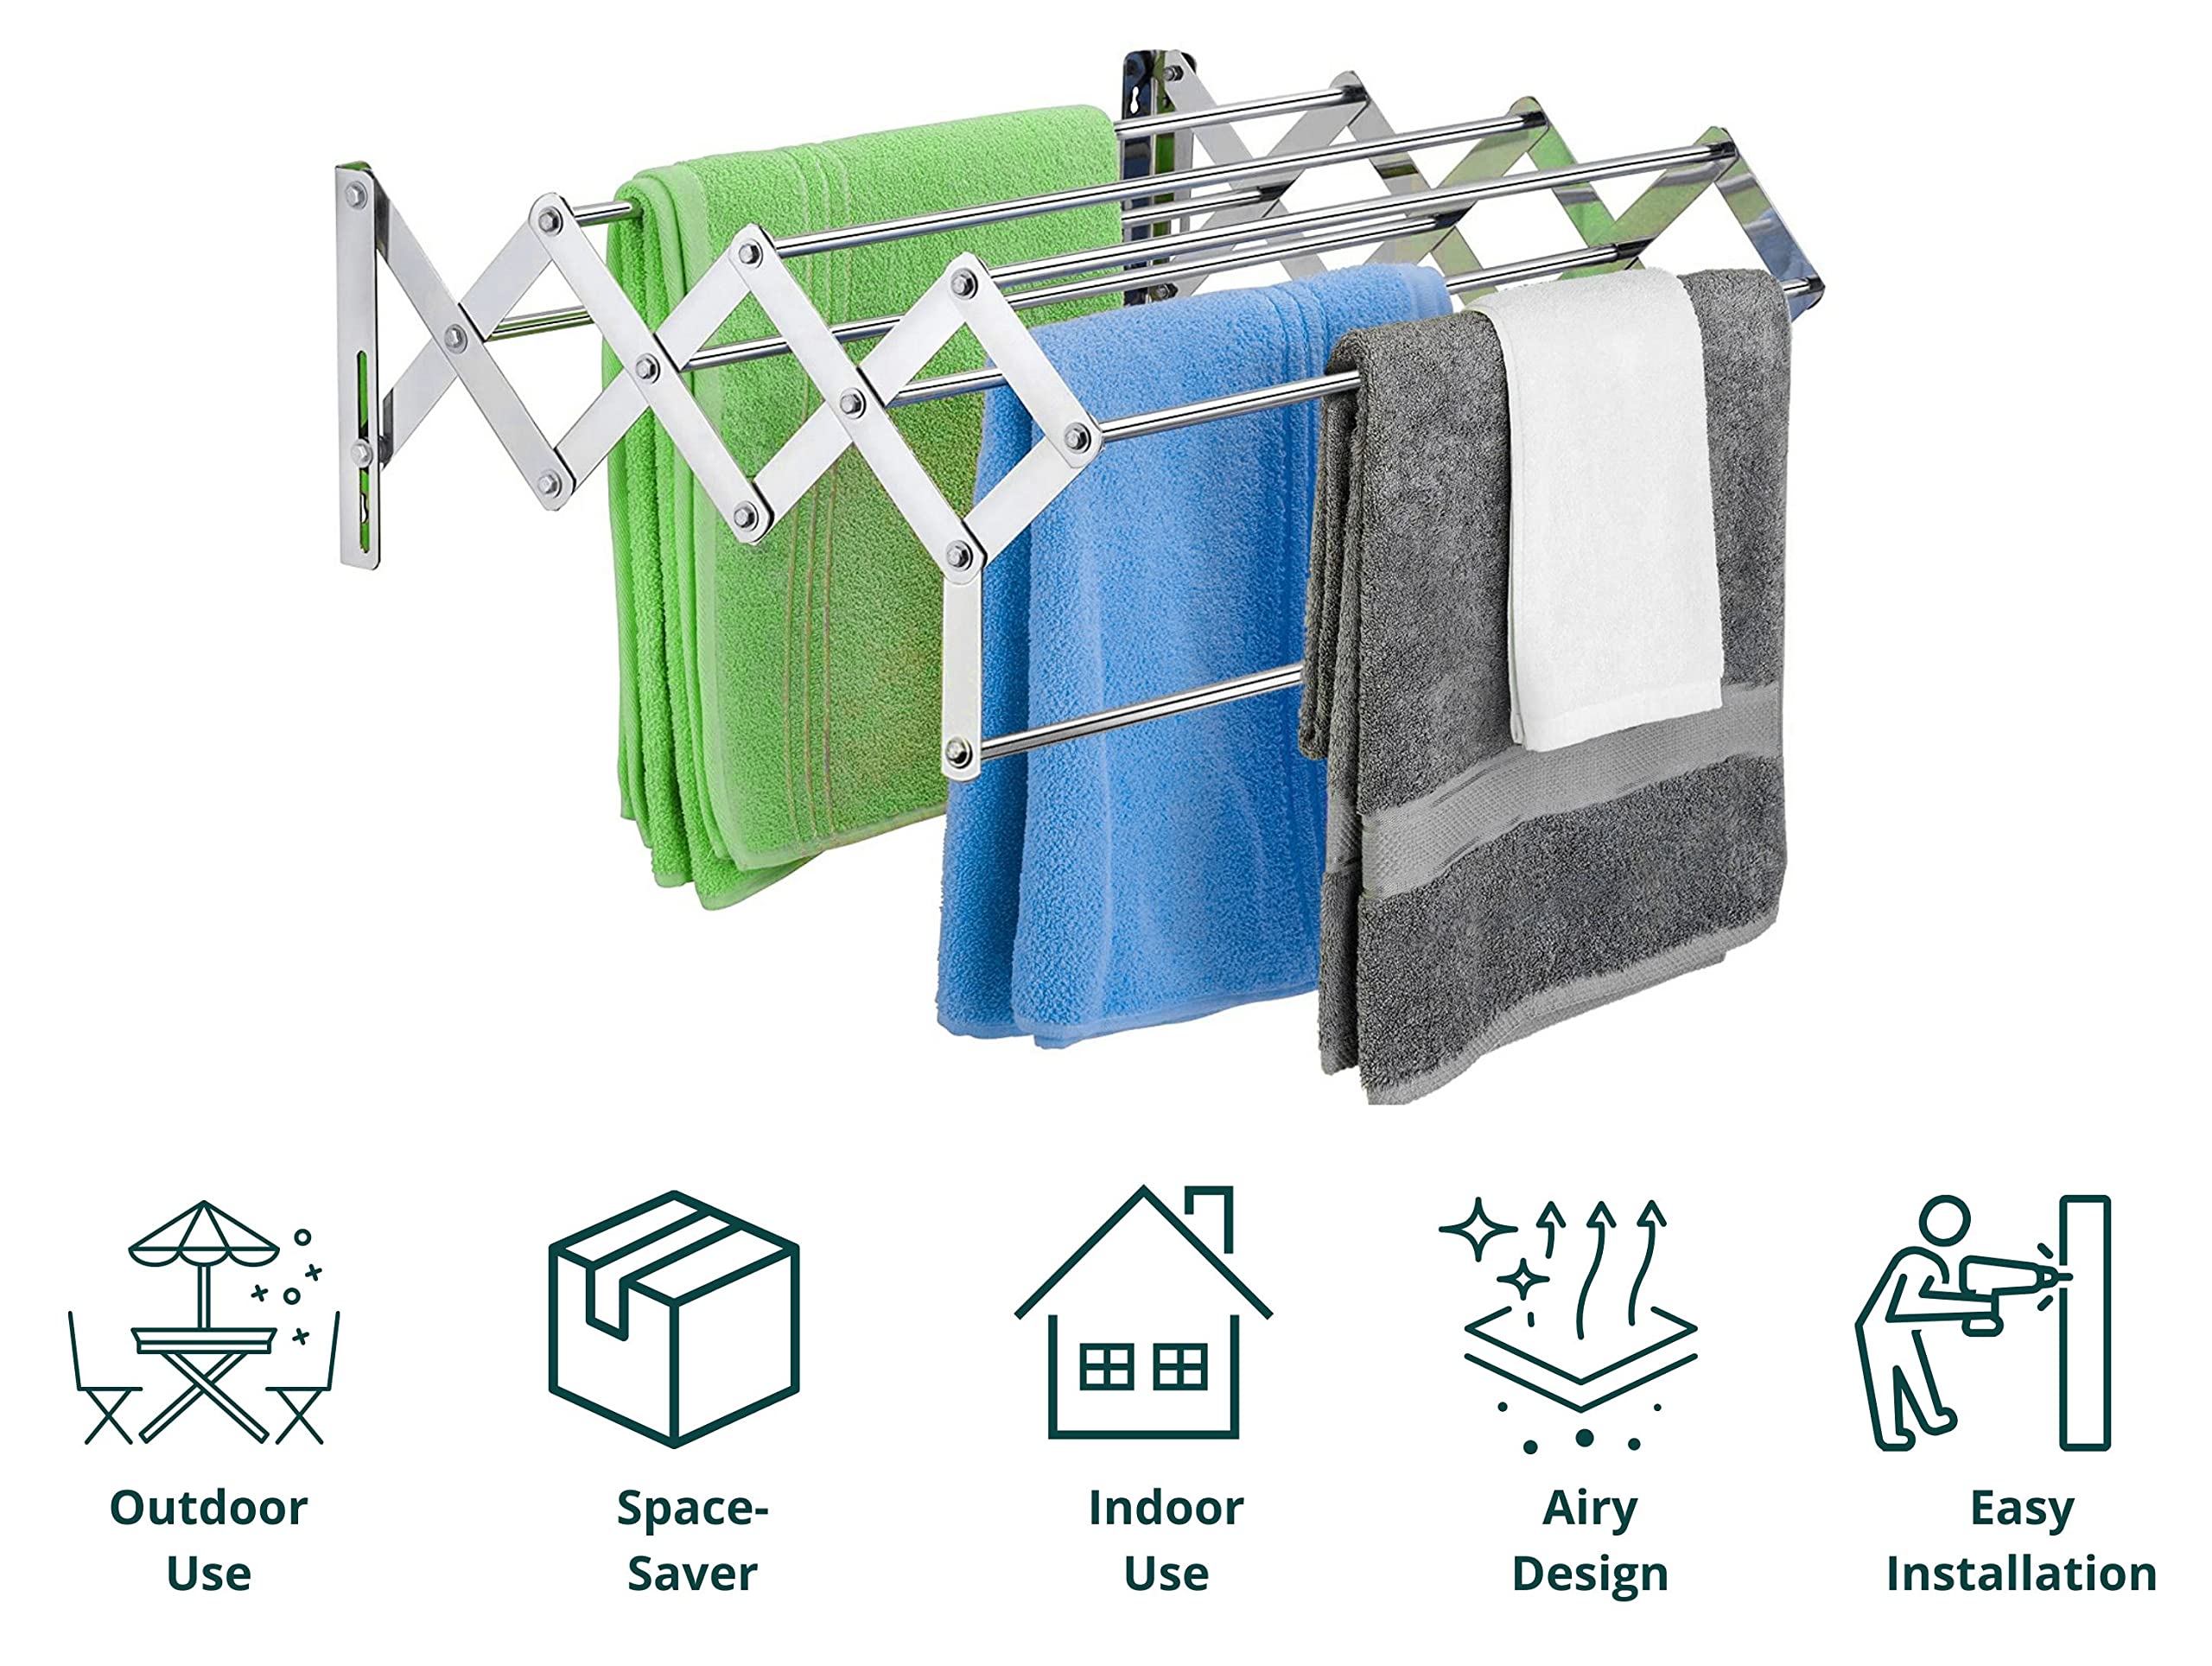 Plantex Stainless Steel Foldable Clothes Drying Rack/Cloth/Towel Stands for Drying Clothes - Wall Mount (Chrome - 24 inch)